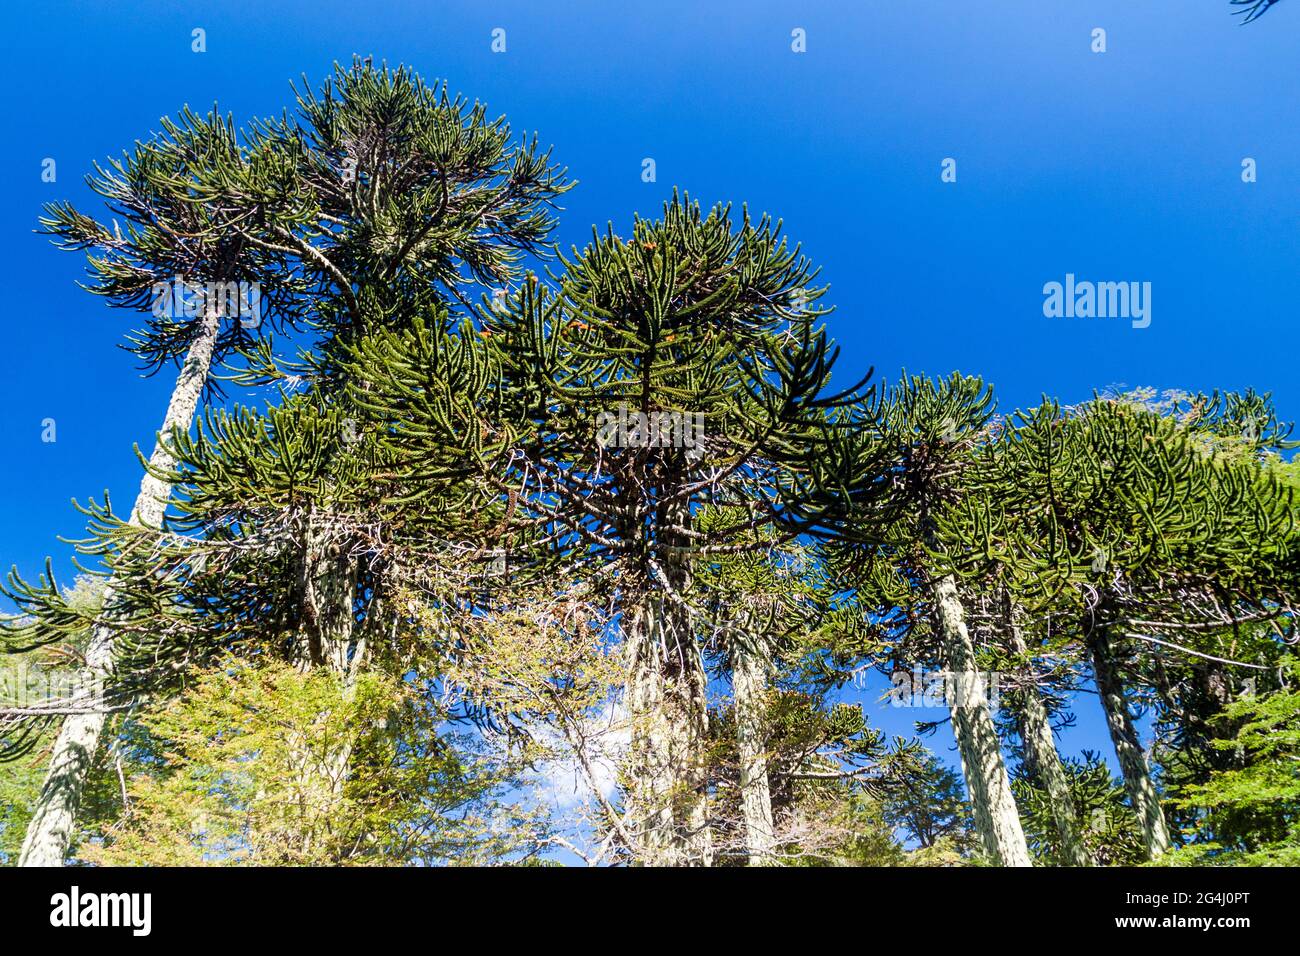 Araucaria trees in National Park Huerquehue, Chile. The tree is called Araucaria araucana (commonly: monkey puzzle tree, monkey tail tree, Chilean pin Stock Photo